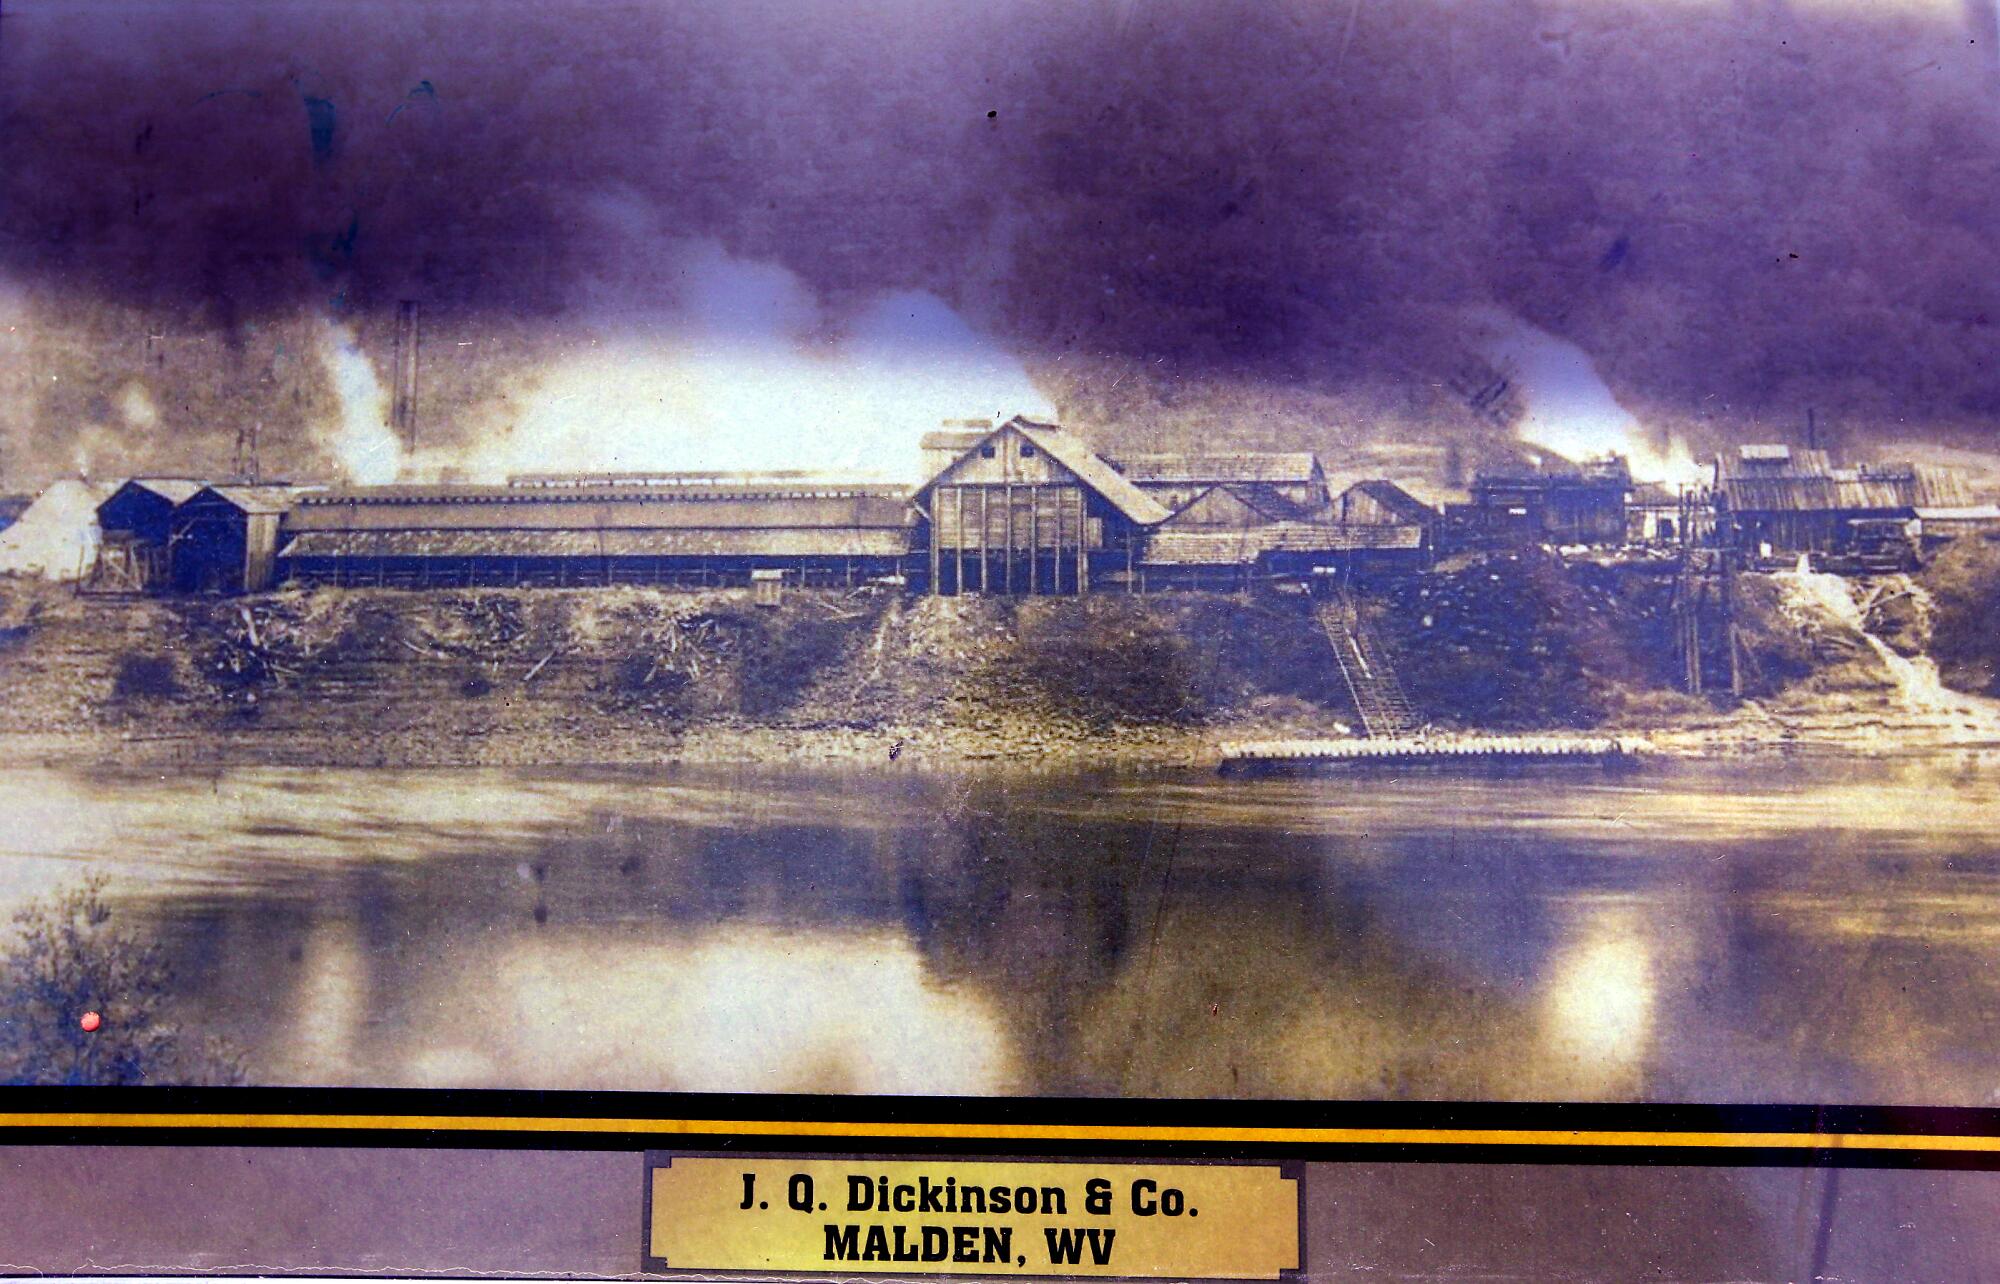 Copy of a photo of the J.Q. Dickinson & Co. salt mine as seen from across the Kanawha River. 